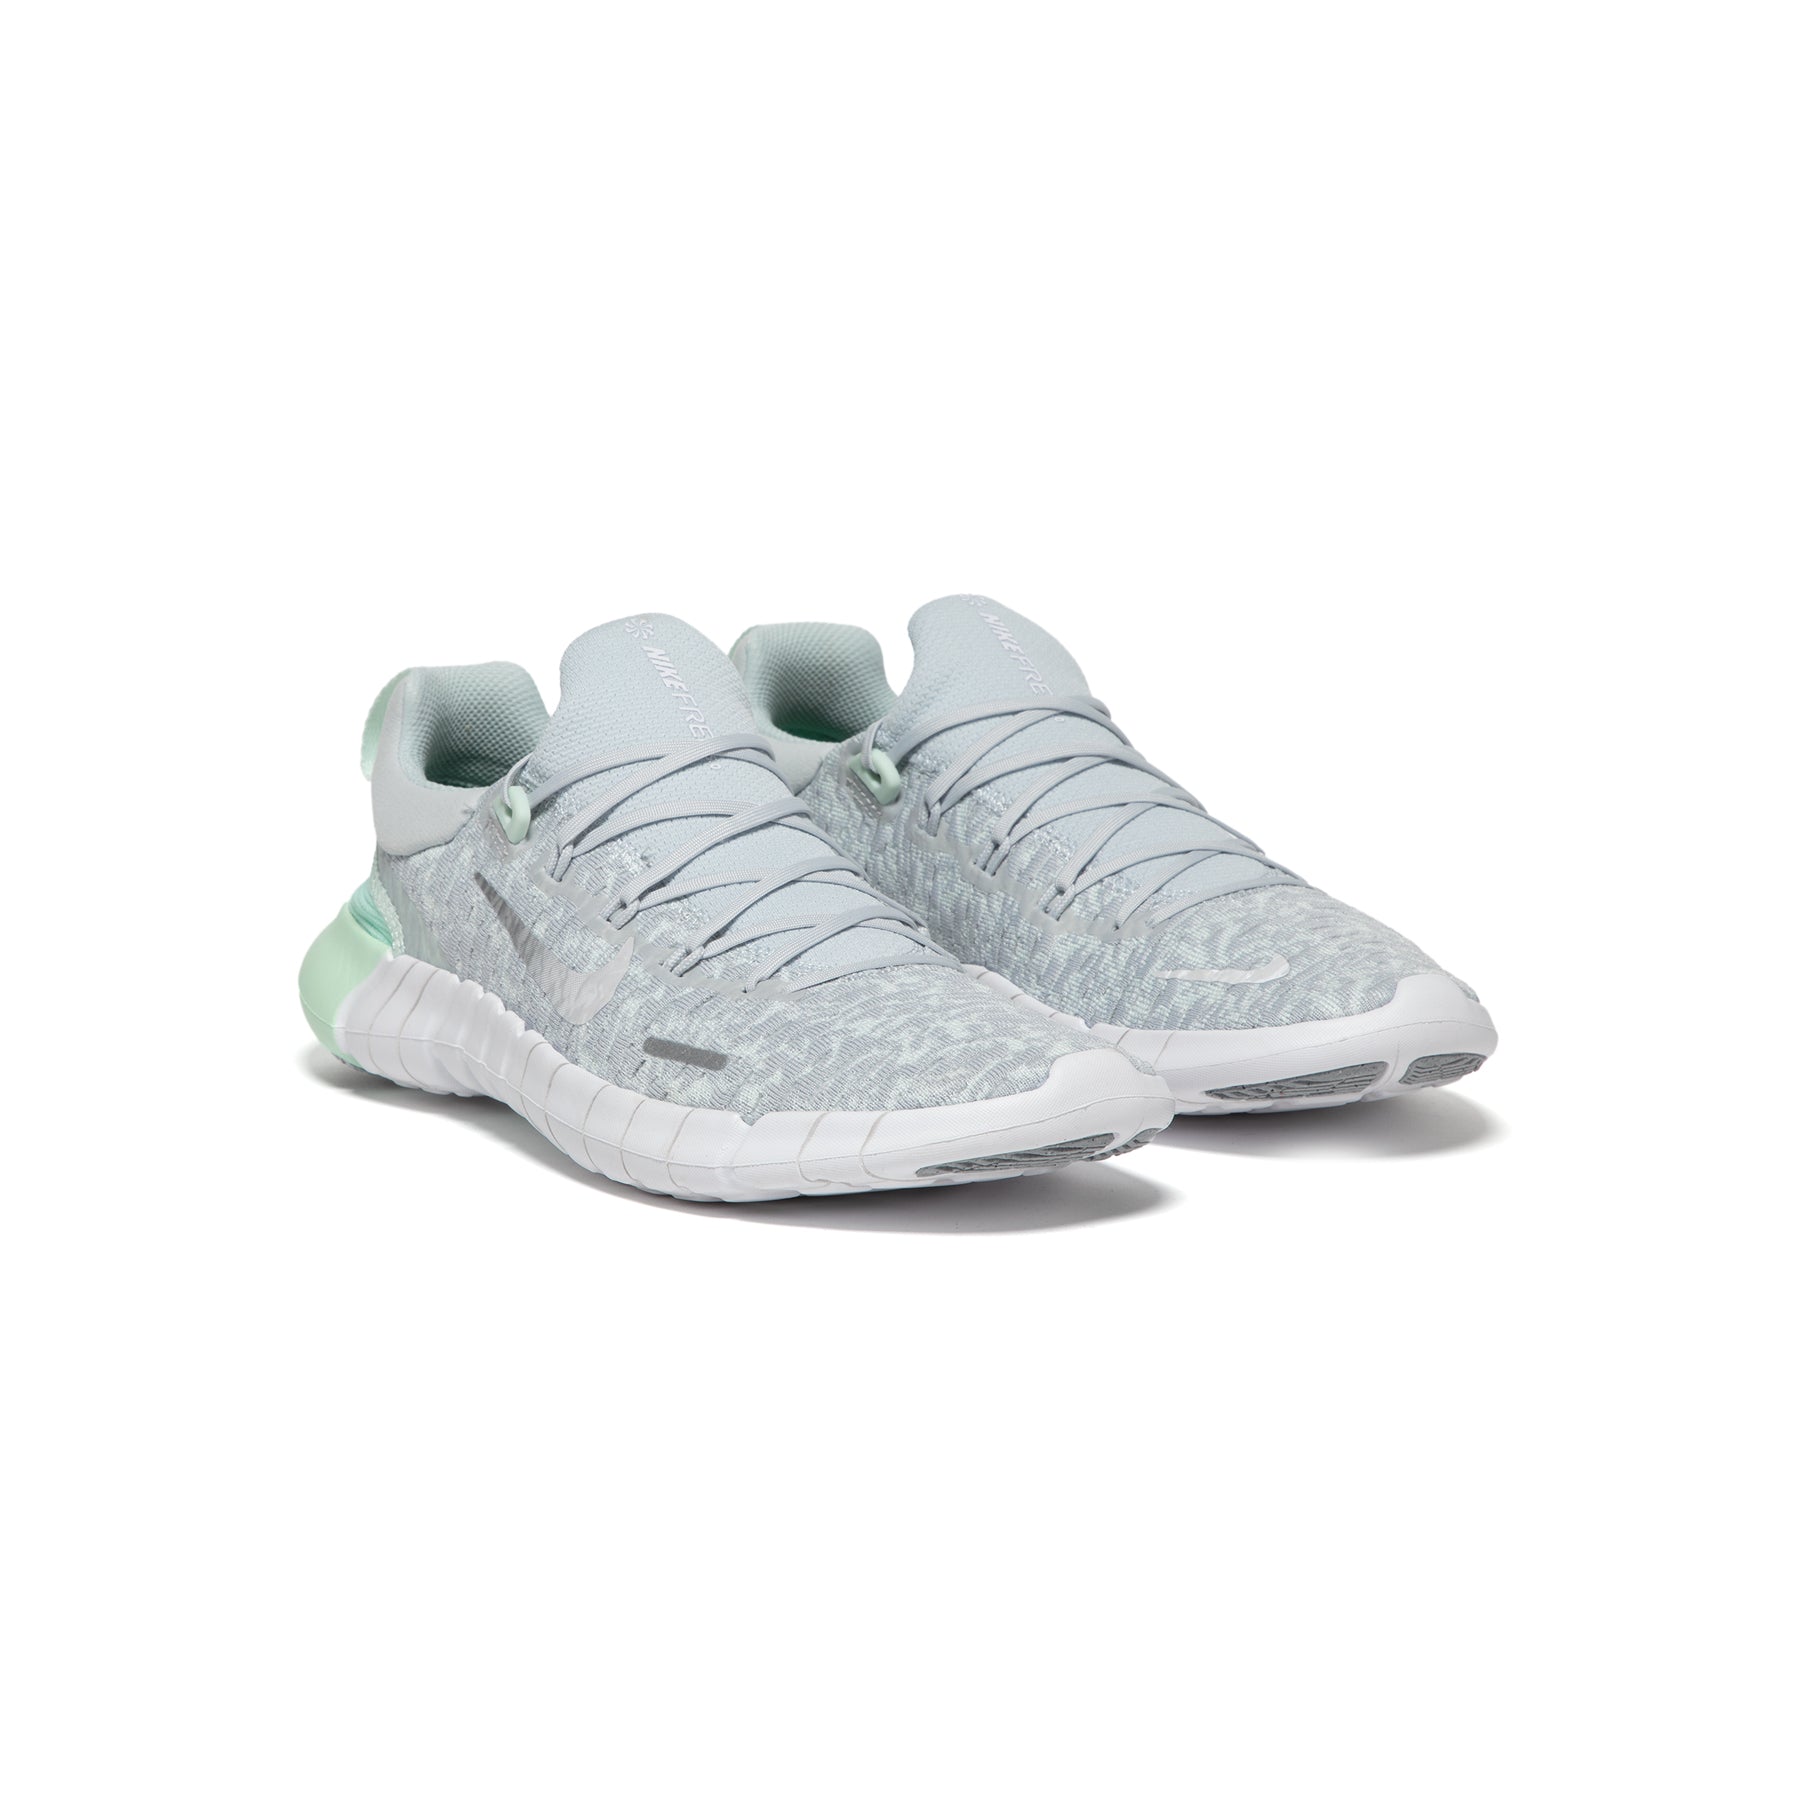 Nike Free 5.0 (Pure Platinum/White/Barely Green) – Concepts